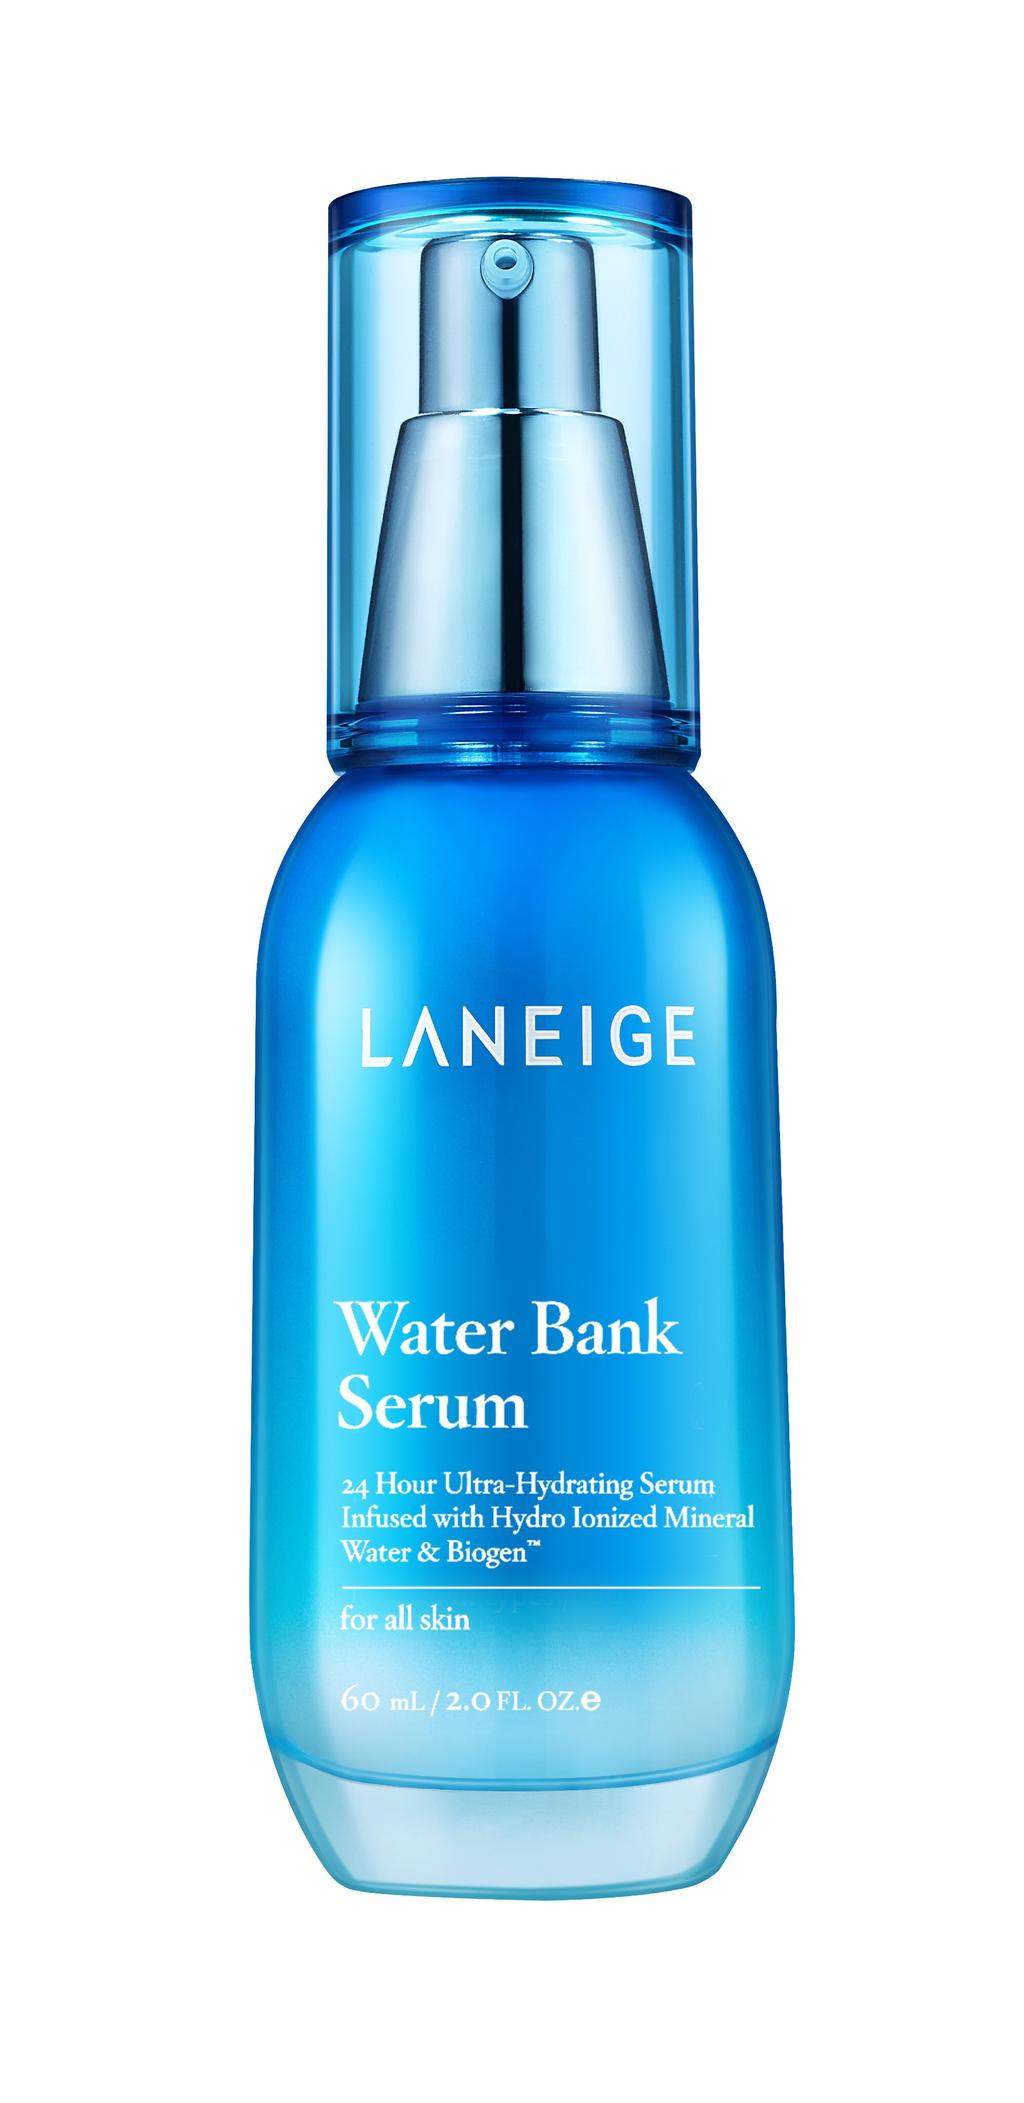 LANEIGE WATER BANK SERUM New LANEIGE Water Bank Serum is a significant advancement in skincare and, clinically proven to hydrate, protect and revitalize.